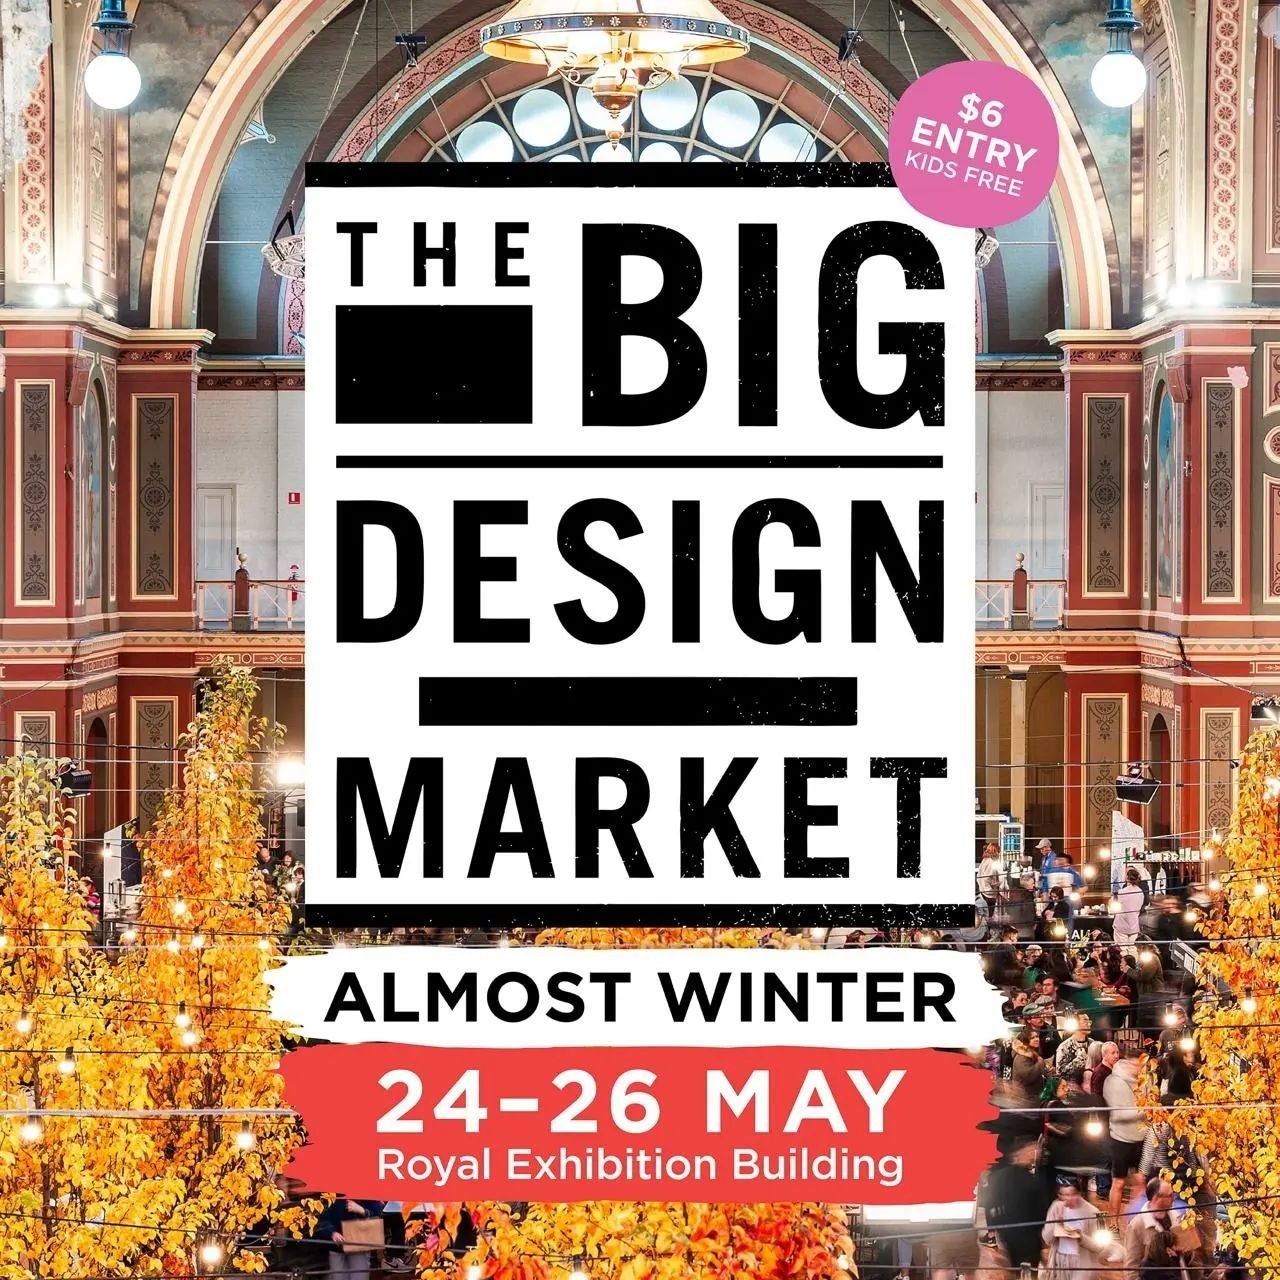 Hey friends! @bigdesignmarket is coming back in TWO WEEKS 😱 Release The Zebra will have a stall there with freshly painted ceramics 🥰 So come along and say hi if you&rsquo;re around, I would love to see your faces! 

In the meantime, please leave m